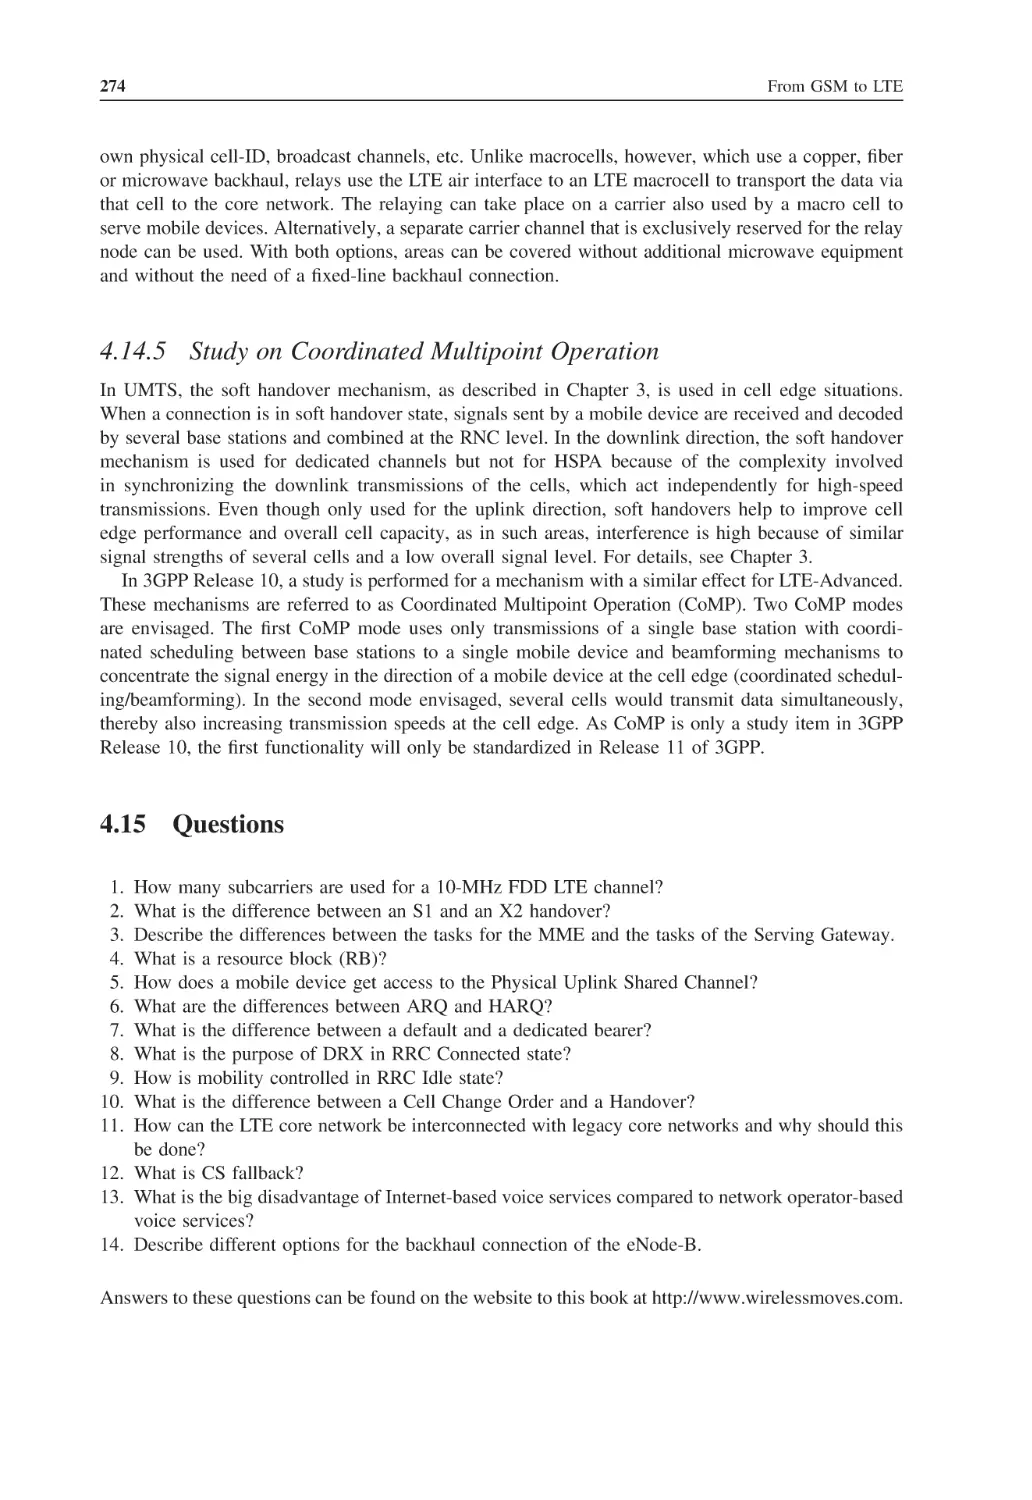 4.14.5 Study on Coordinated Multipoint Operation
4.15 Questions